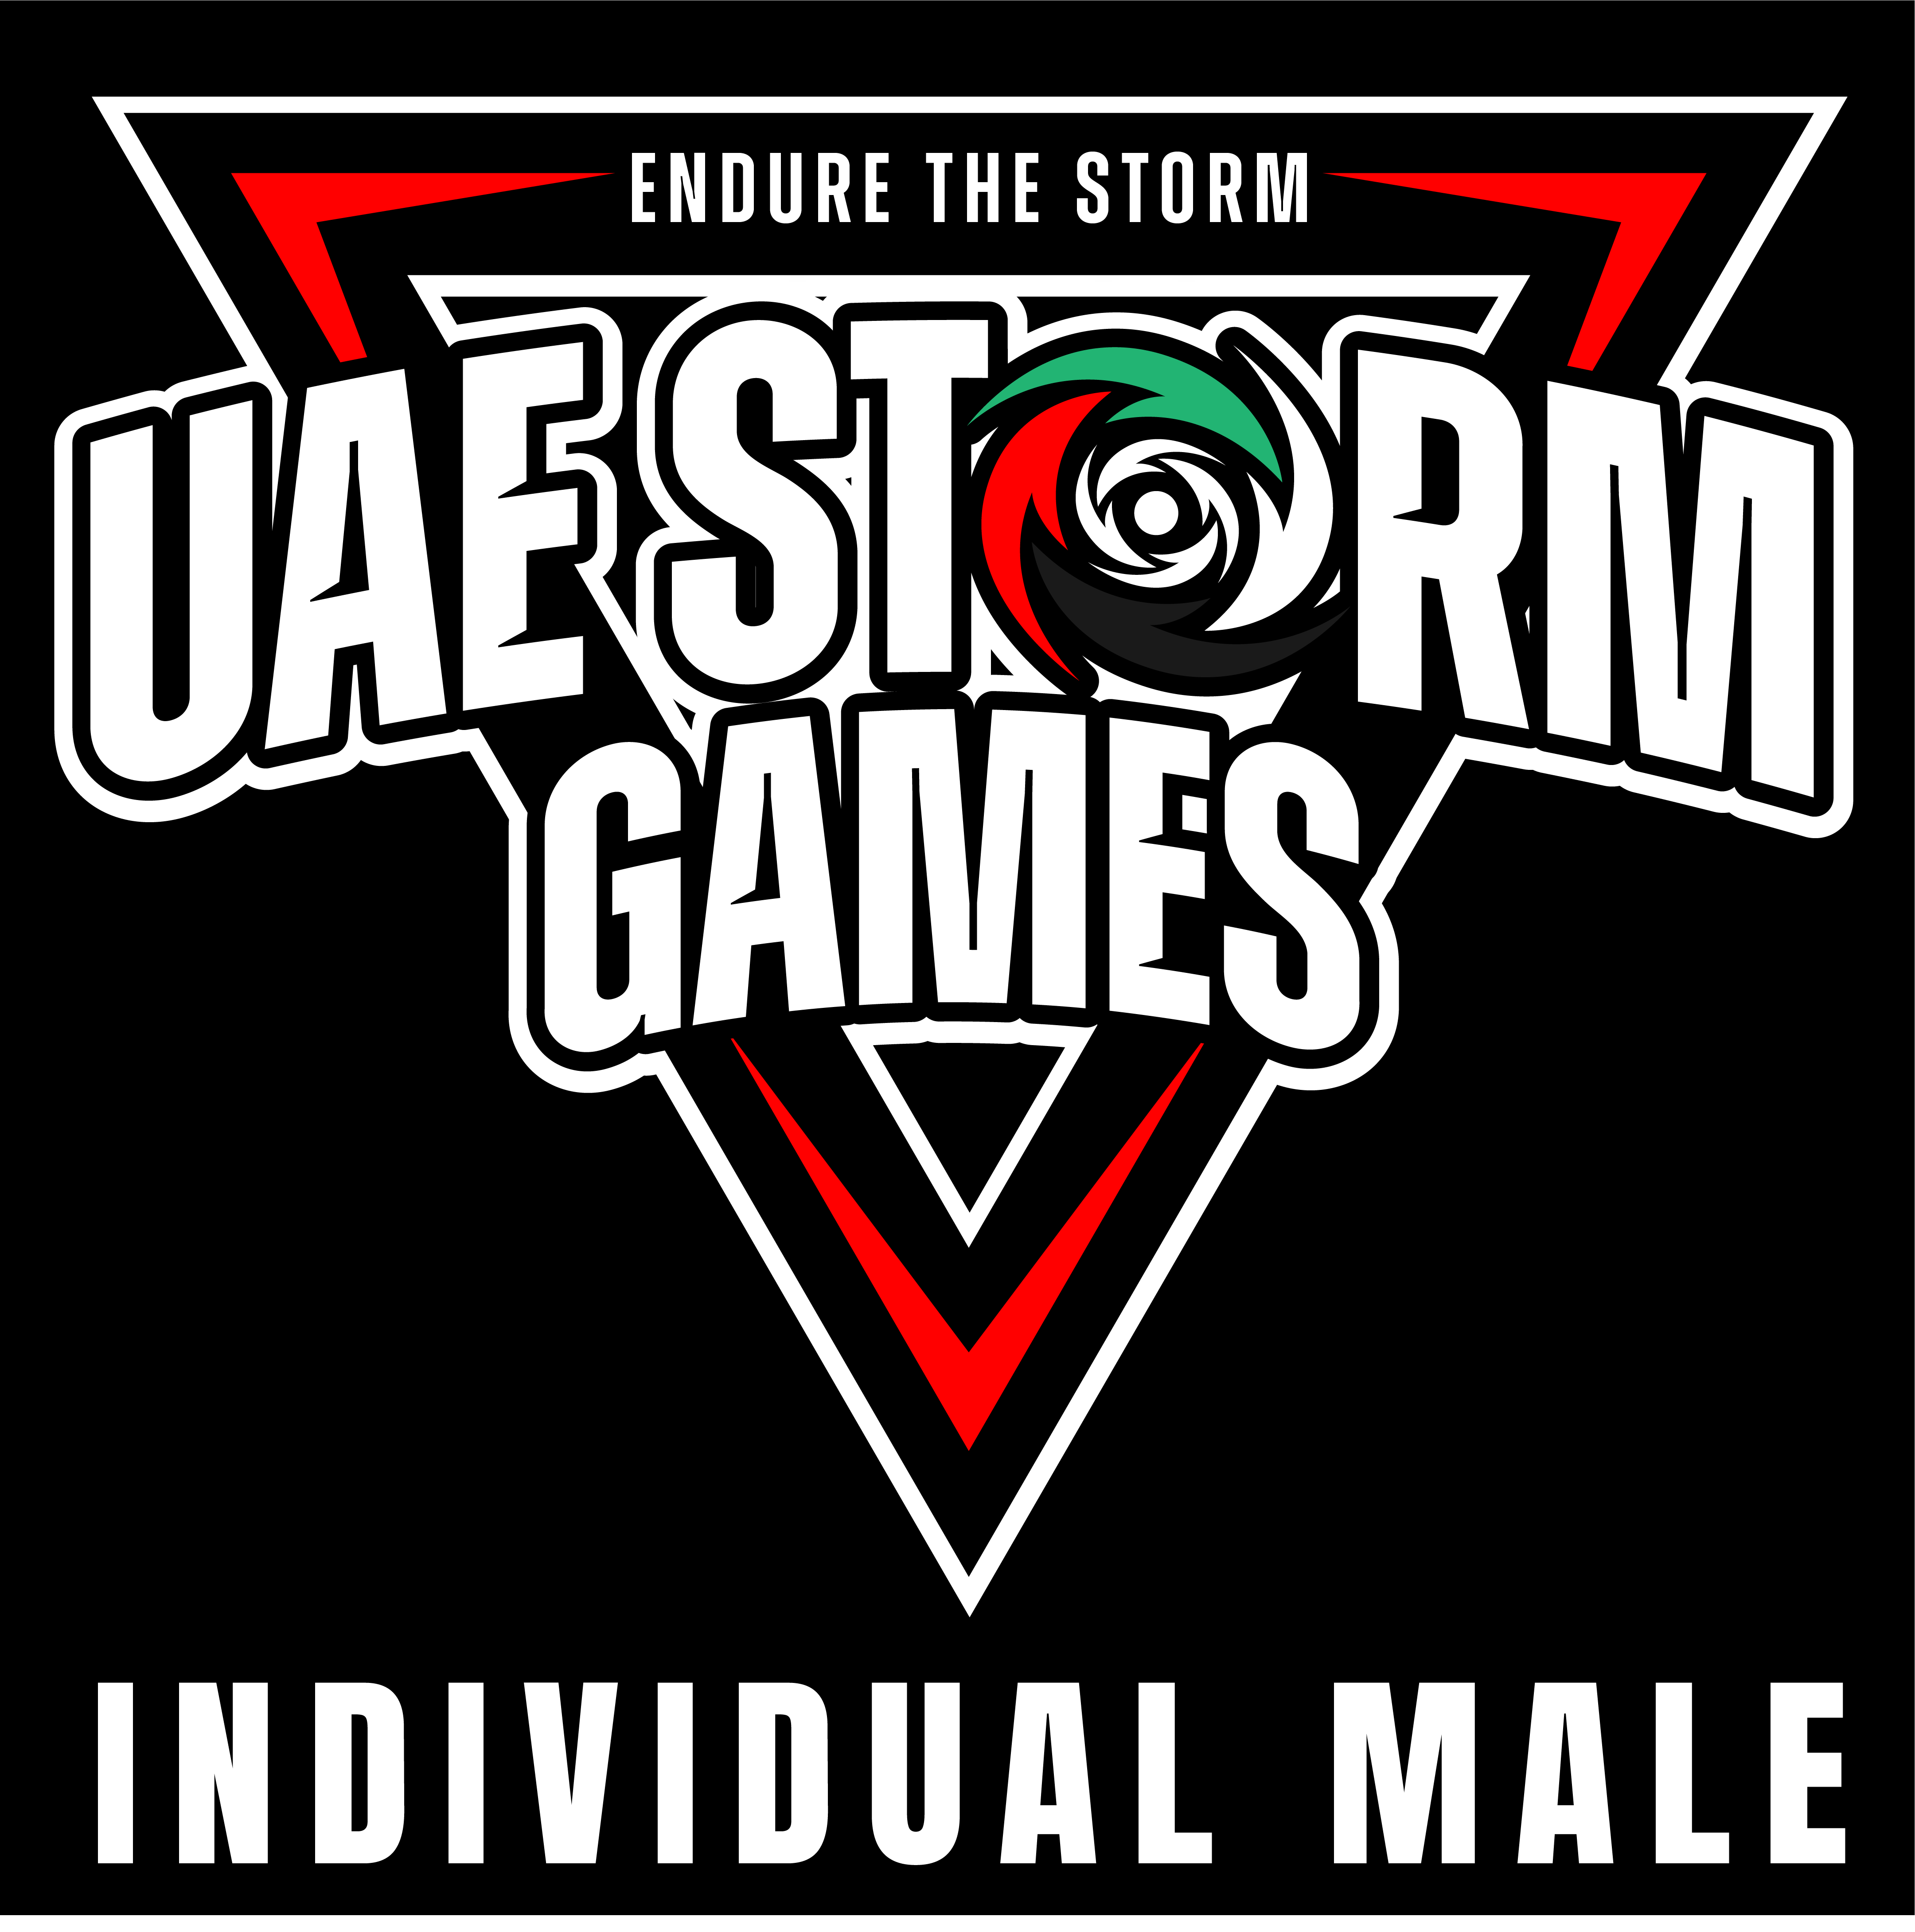 Male Individual Category from UAE Storm Games'24 for Genejack WOD